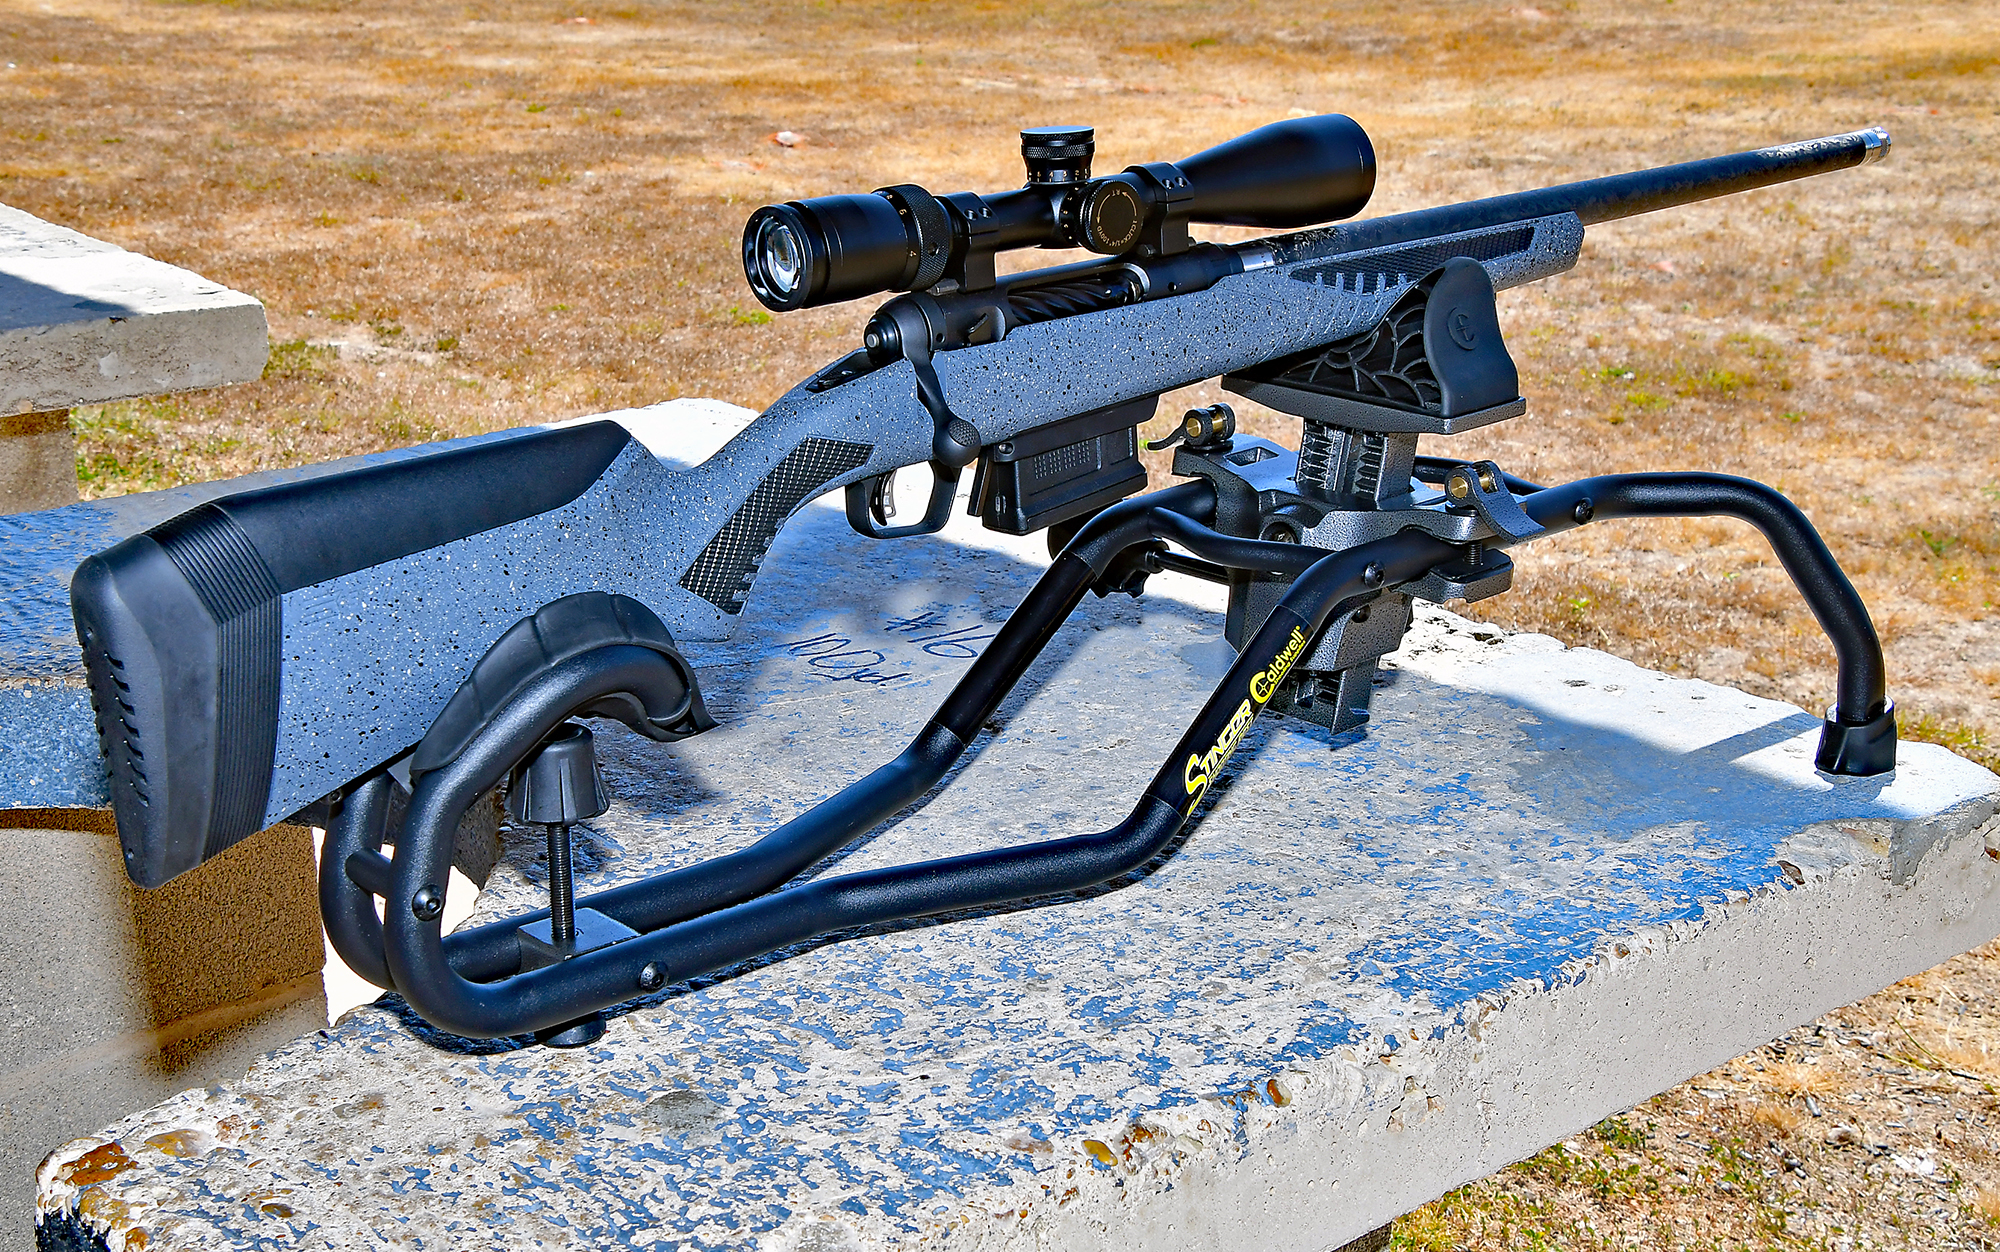 We tested the Caldwell Stinger Shooting Rest.